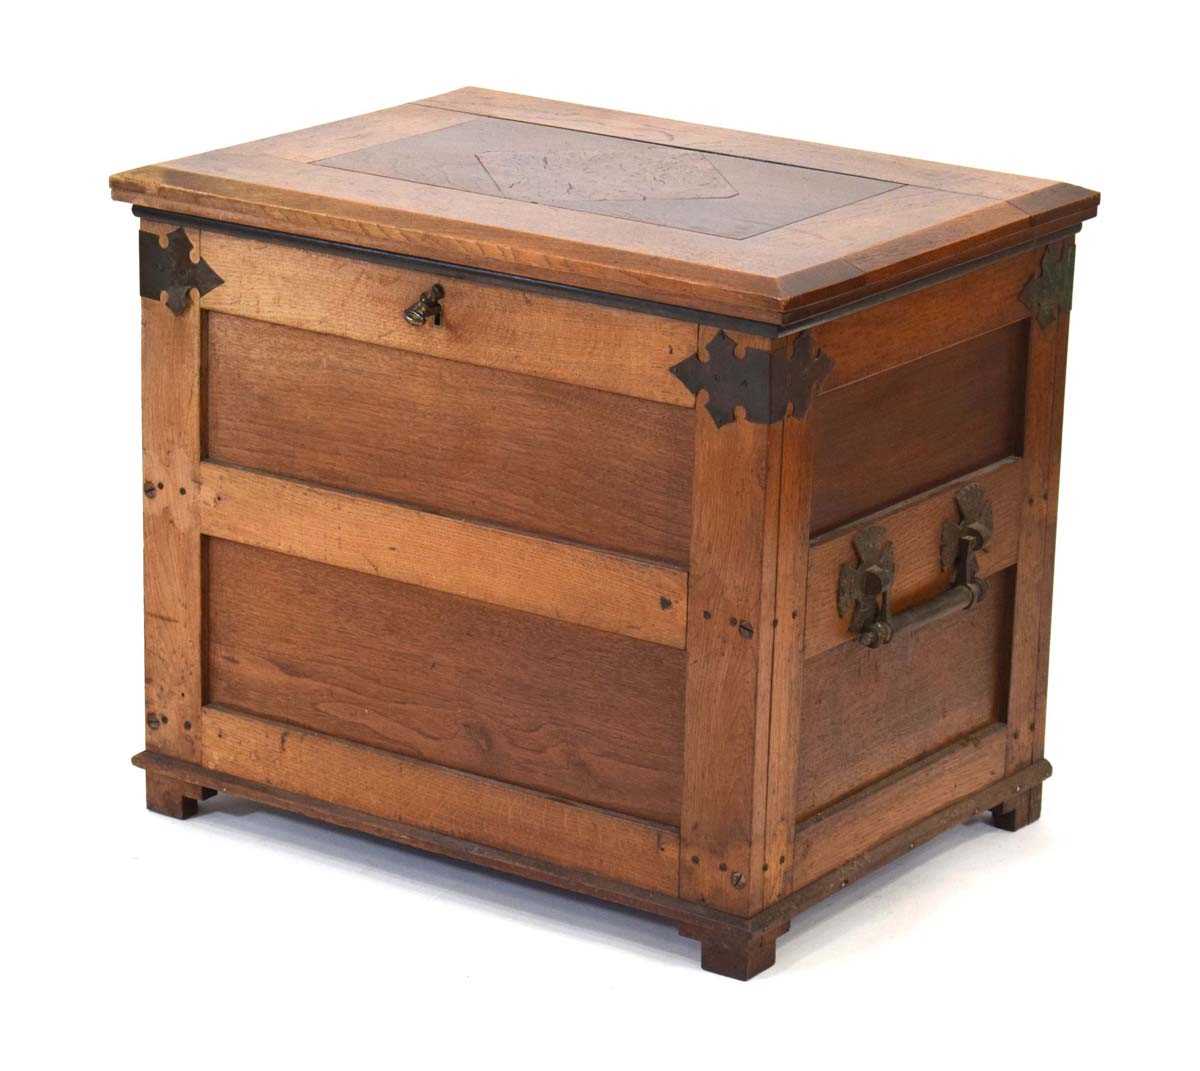 An elm, oak and walnut silver chest with brass mounts and handle, the lid opening to reveal a